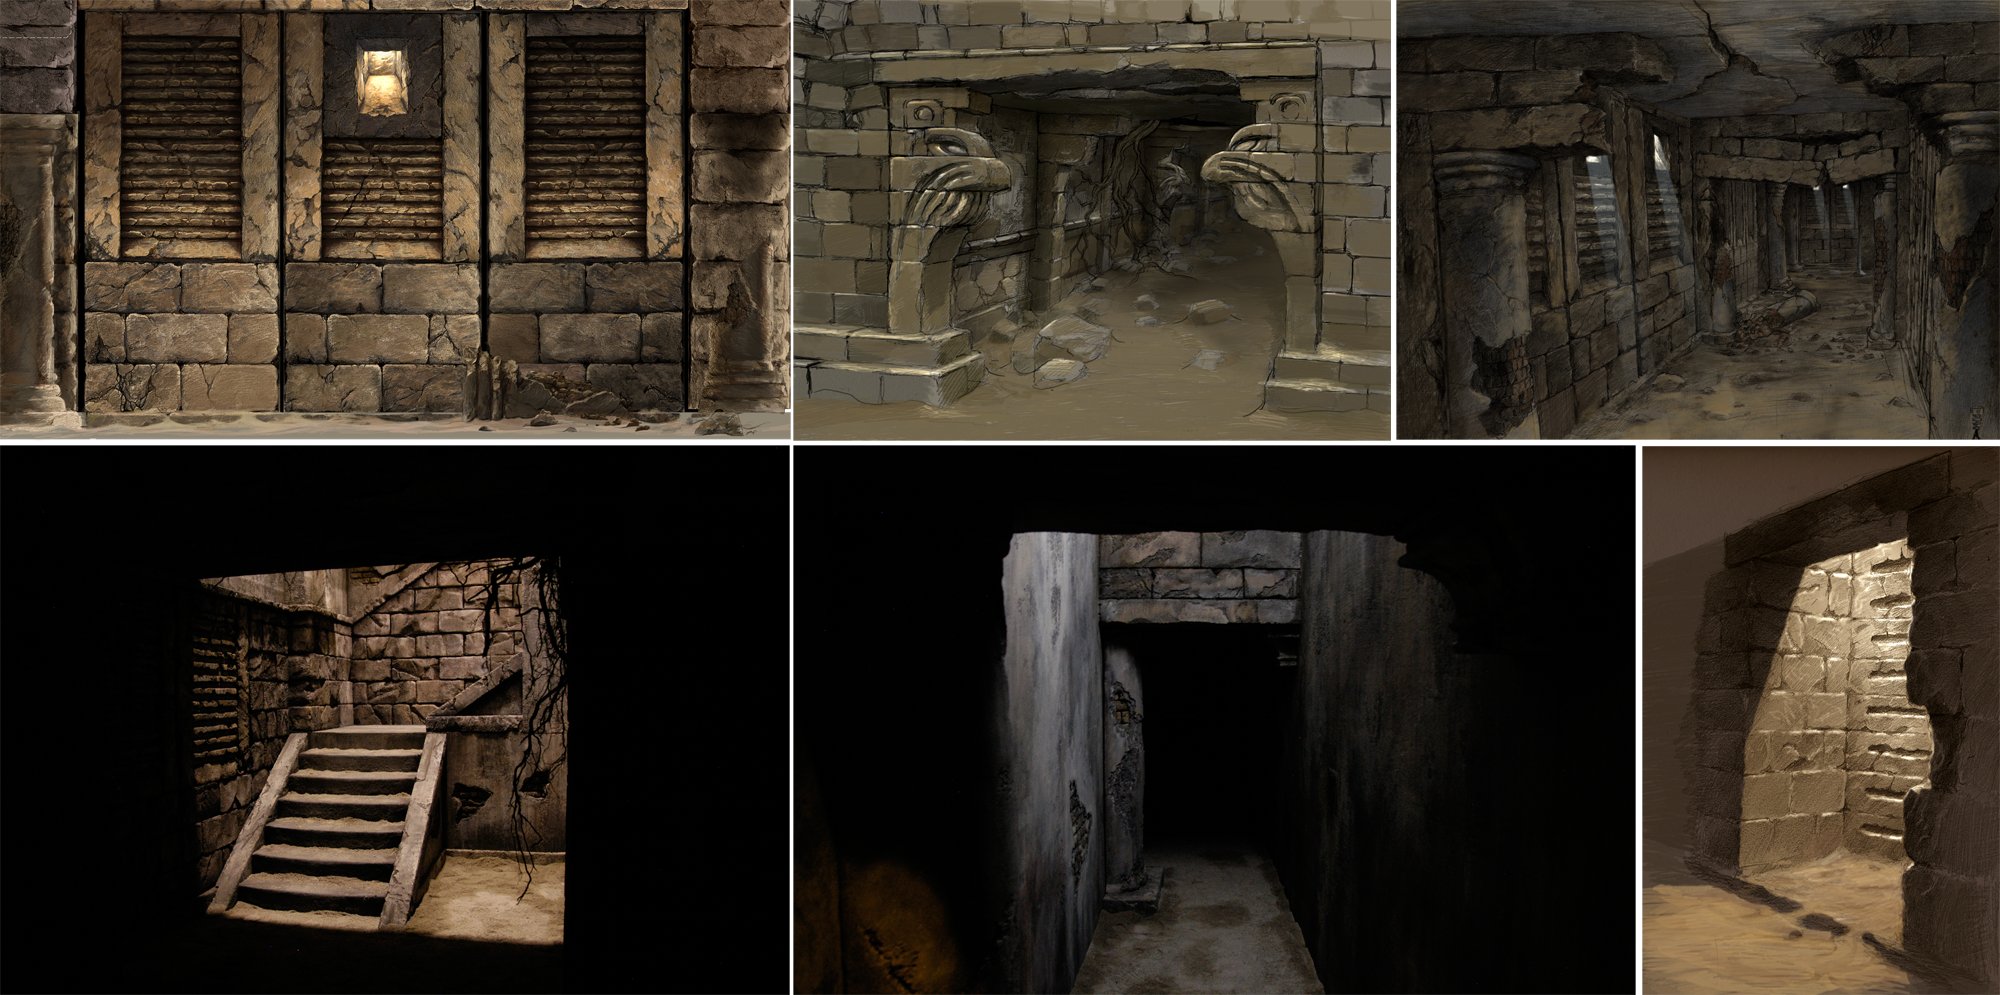 These are designs (top) and photos (lower) of a rotting tomb set. I designed floating ceiling slabs with huge cracks in them that allowed as to skiff dirt and detritus down on our actors, while looking very precarious.